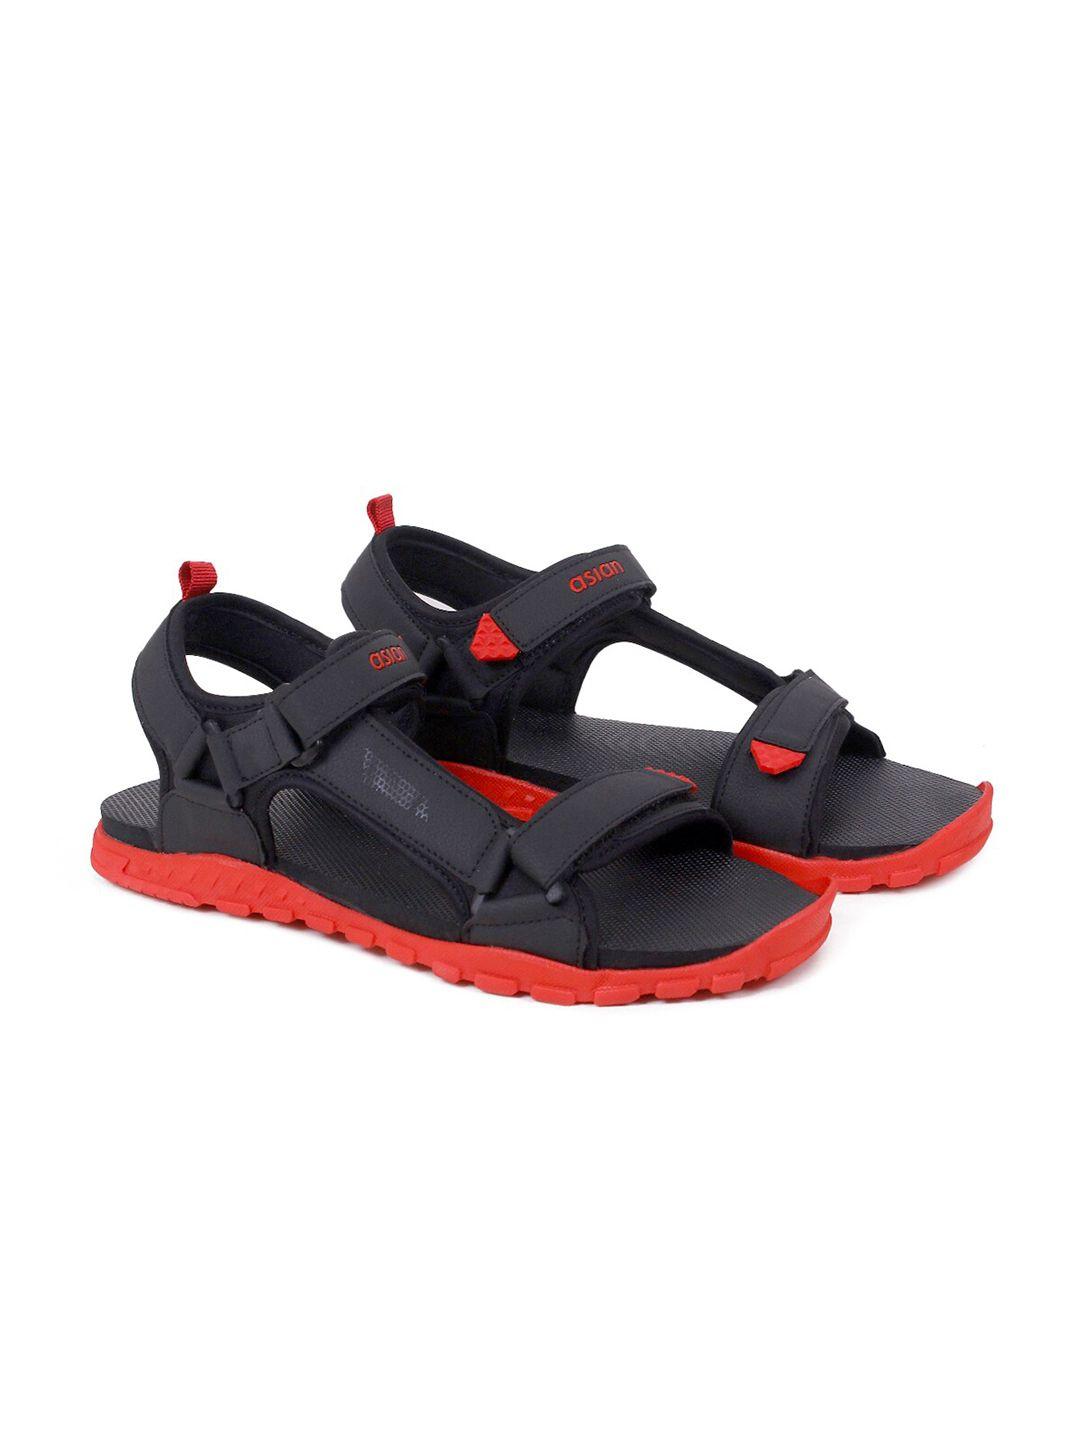 asian-men-black-textured-synthetic-leather-sports-sandals